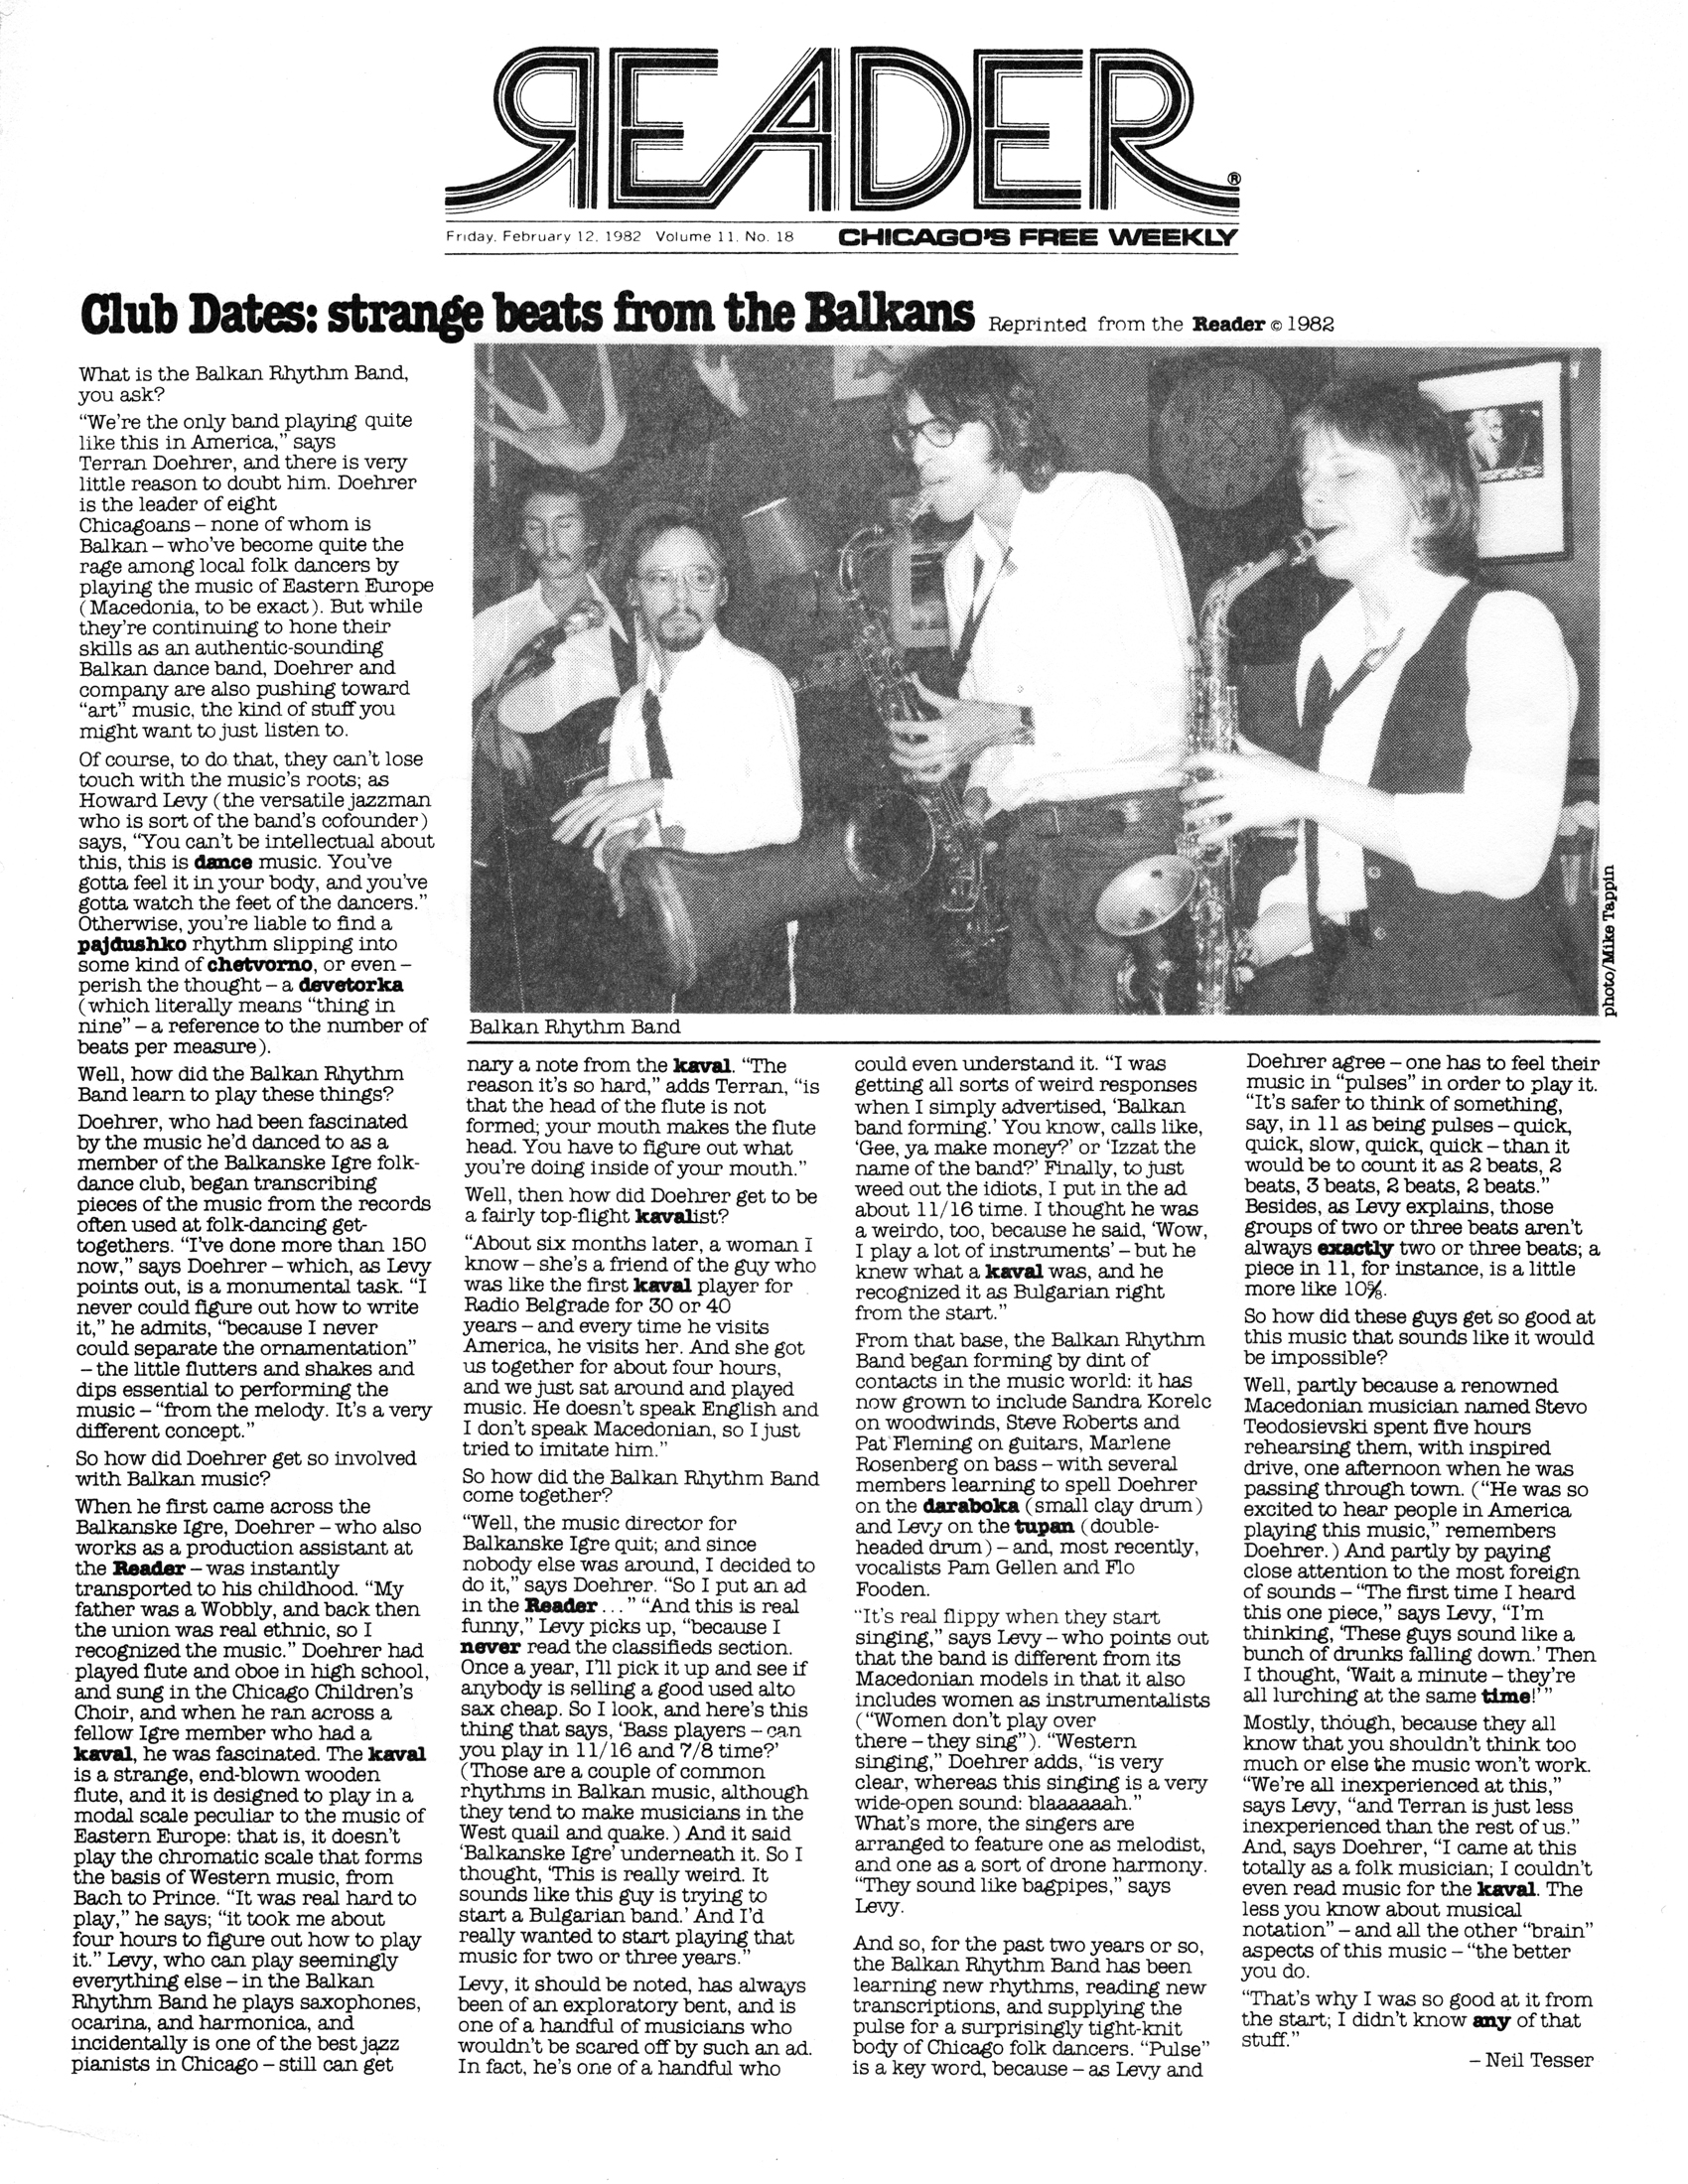 Chicago Reader newspaper February 12, 1982 clipping about the Balkan Rhythm Band (tm)